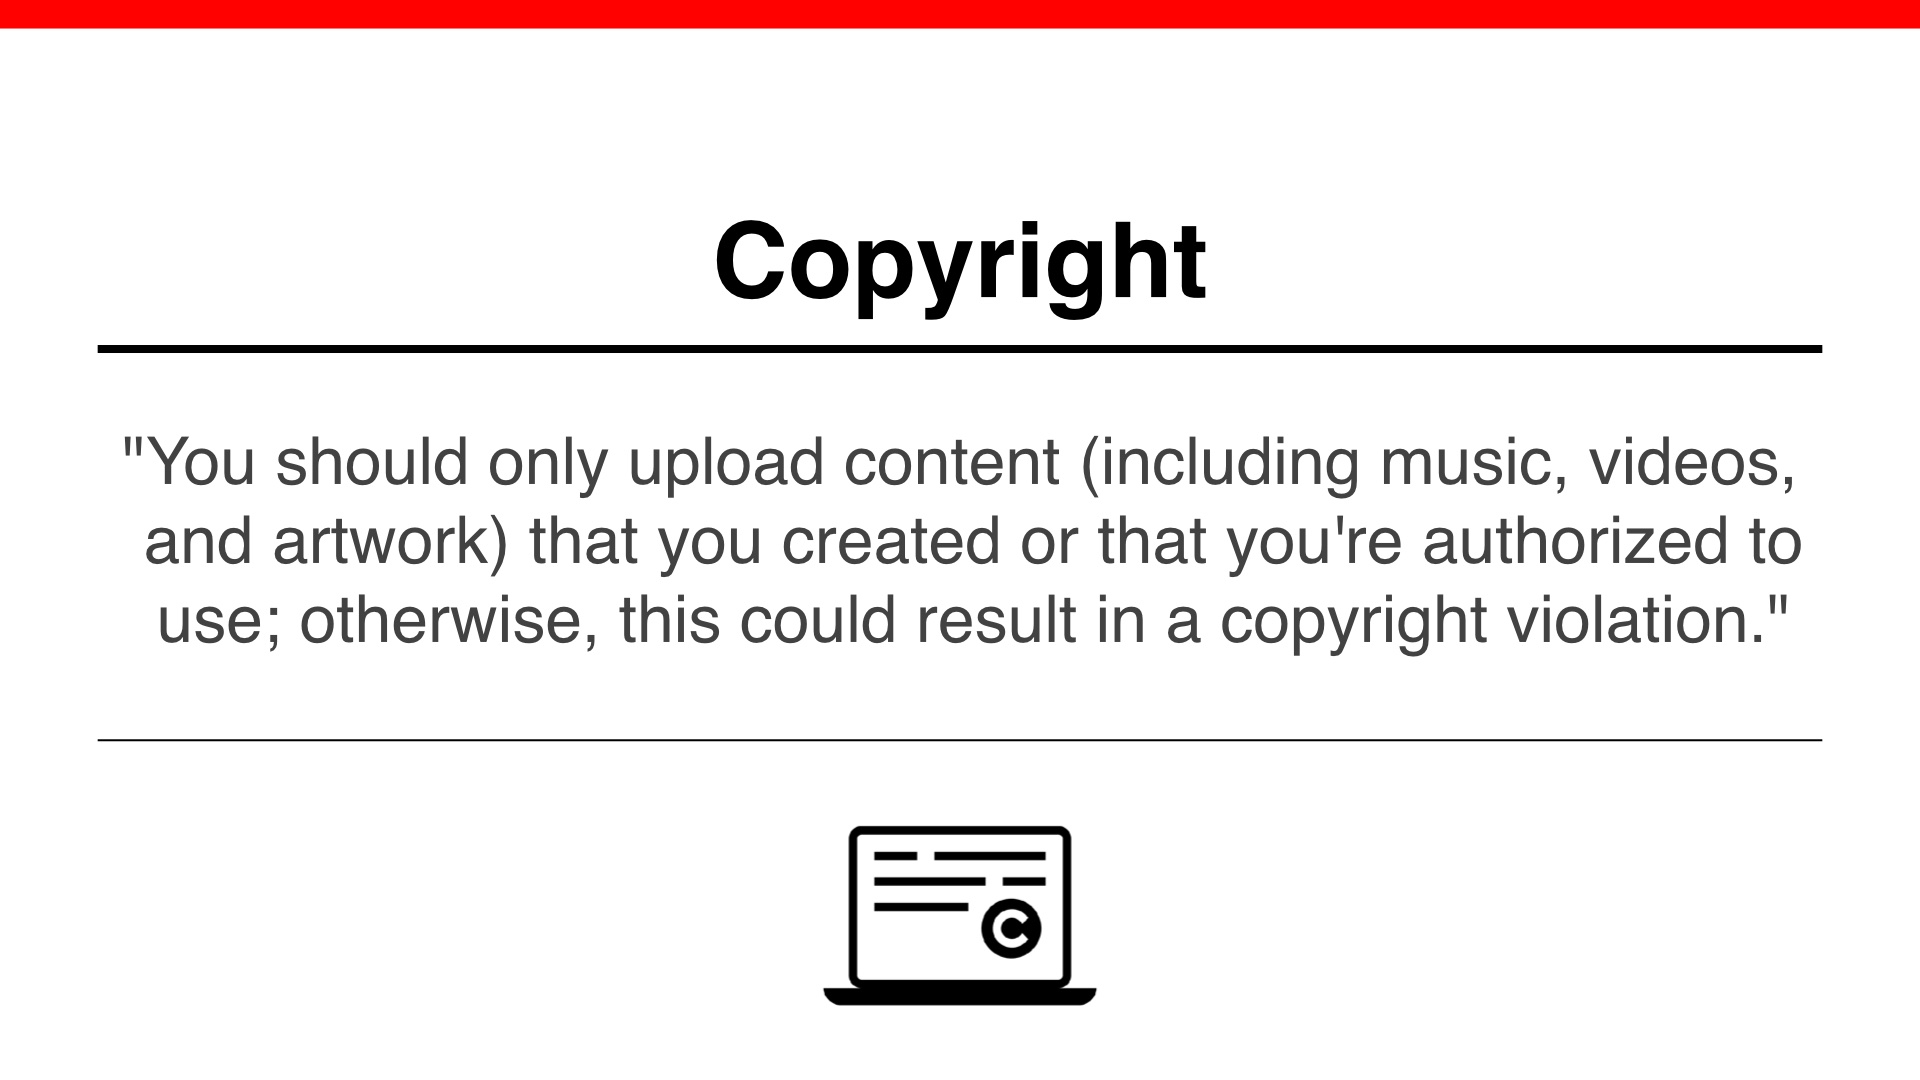 Copyright: (quote from YouTube) 'You should only upload content (including music, videos, and artwork) that you created or that you're authorized to use; otherwise, this could result in a copyright violation.'